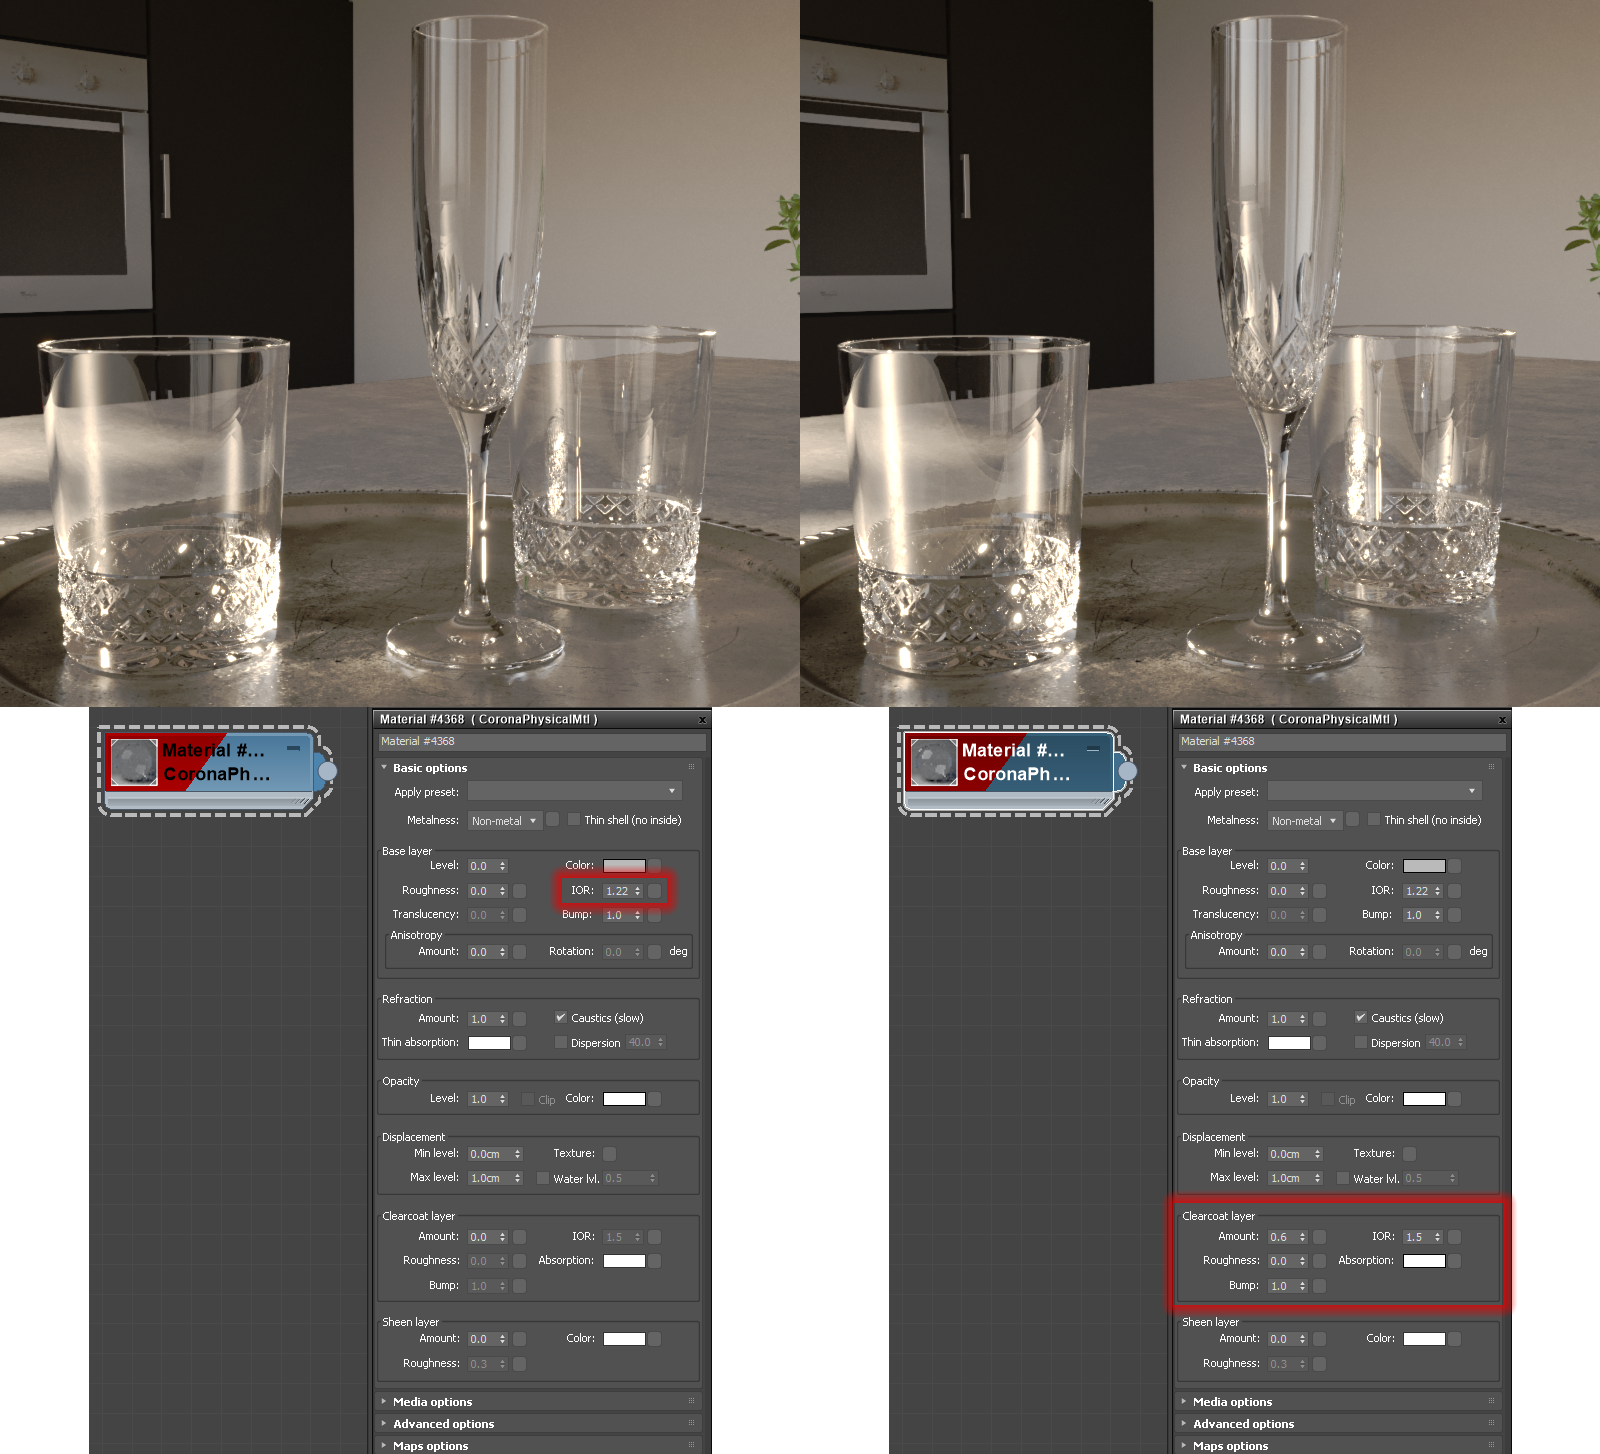 a) Real-time transparency change and layer appearance in the 3D